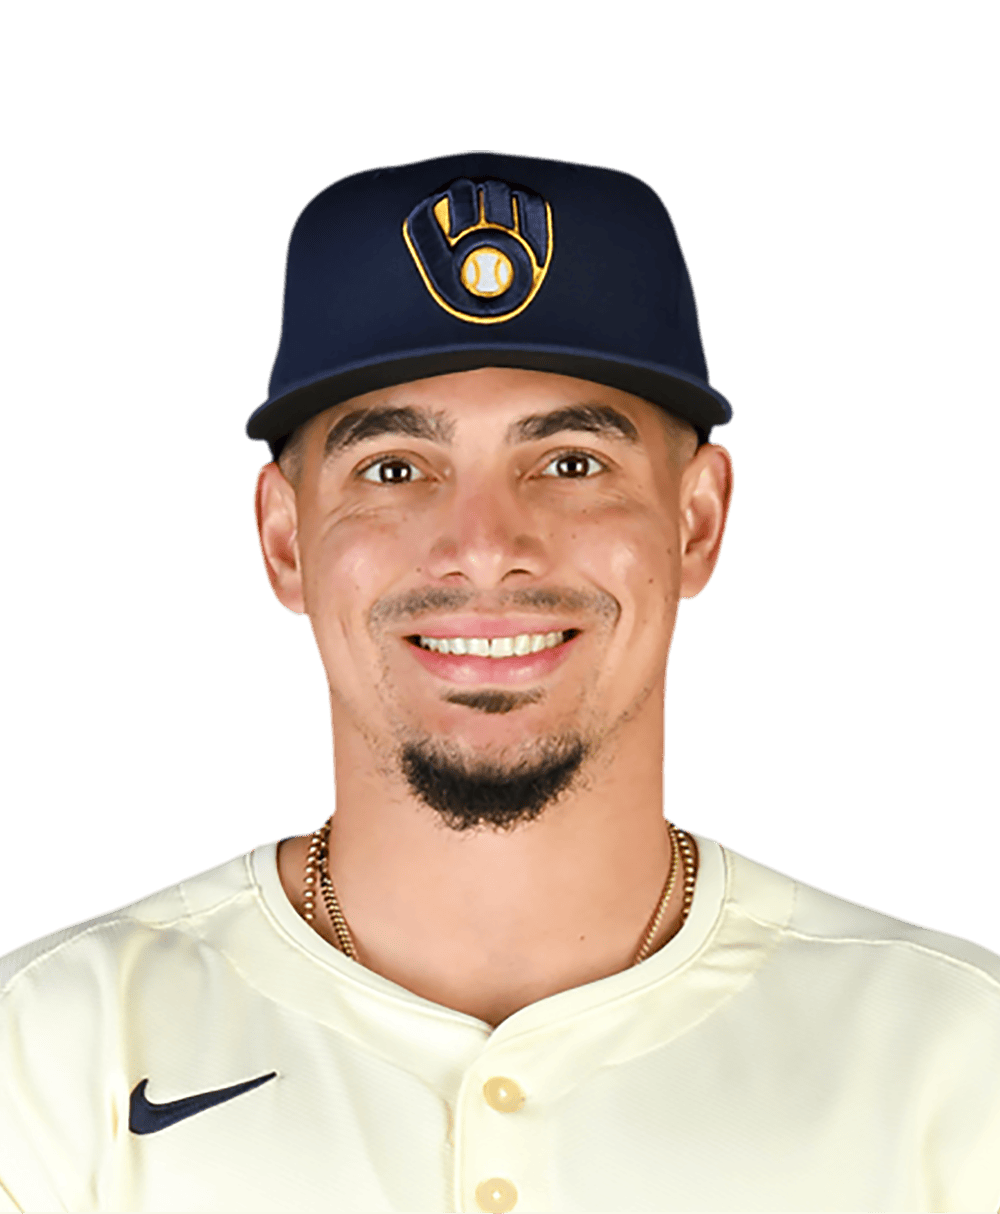 Willy Adames homers twice, drives in 5 as the Brewers down the